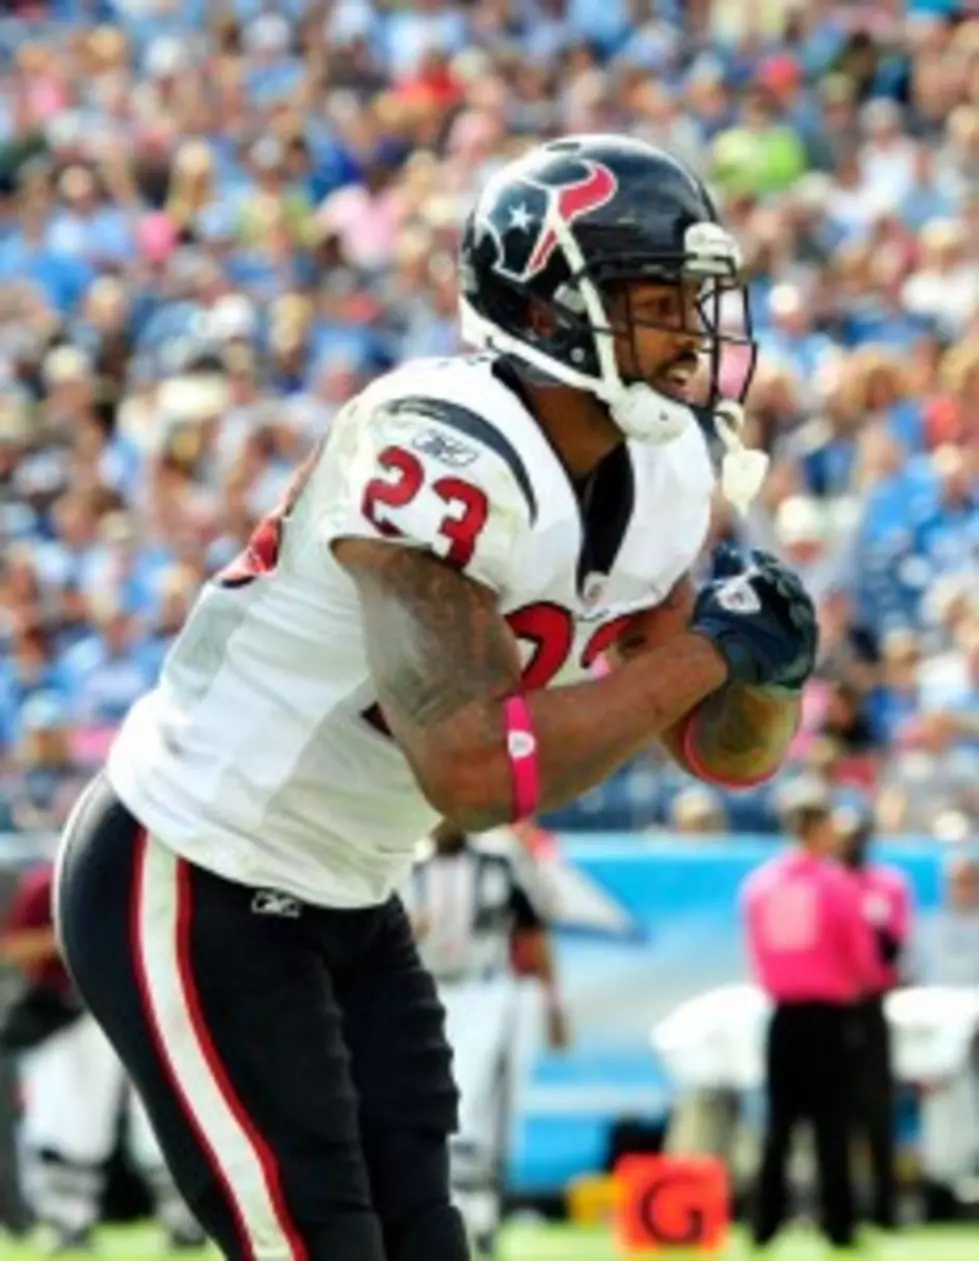 Houston Texans Dominate Tennessee in 41-7 Win